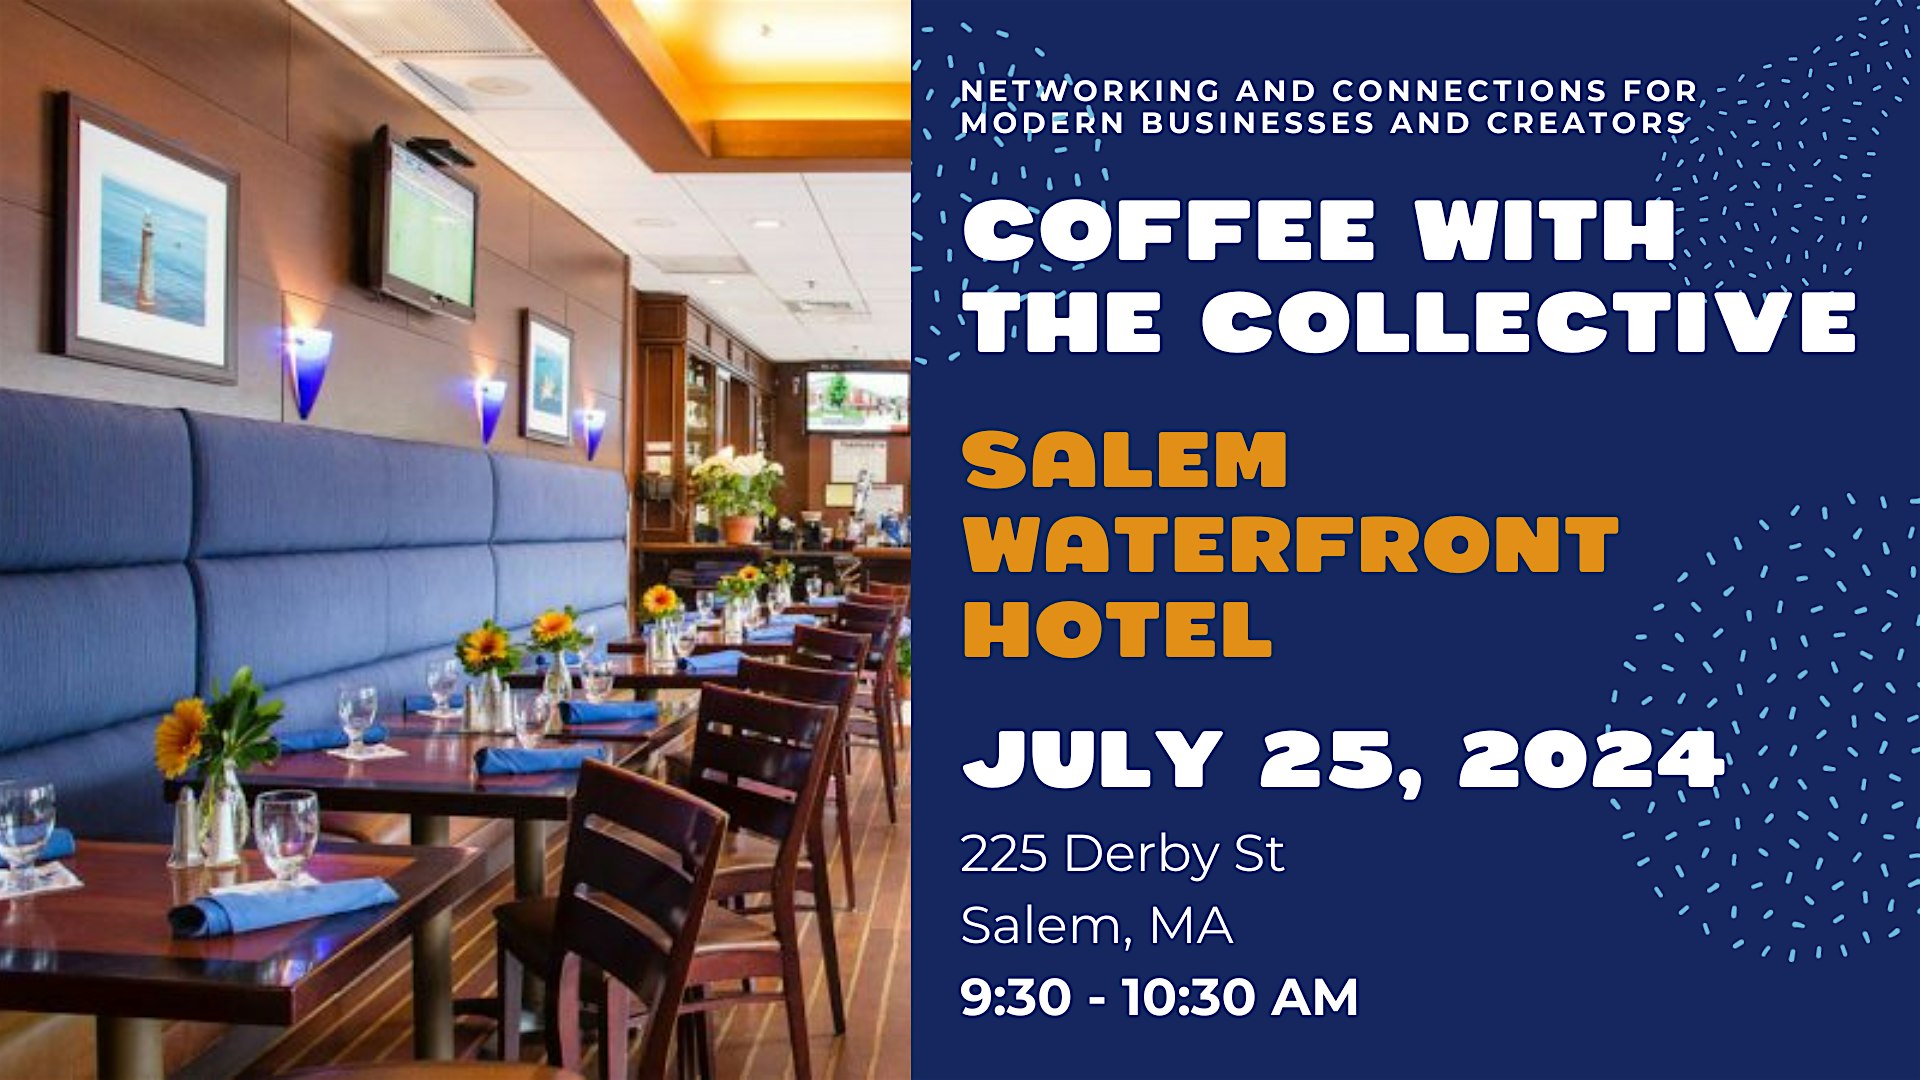 Join us for a lively coffee event at the Salem Waterfront Hotel in Salem, MA! Co-hosted with "The Collective," we will be savoring the finest brews on July 25, 2024. The aroma begins wafting from 9:30 AM until 10:30 AM. Let's stir up conversations and connections over cups of coffee!